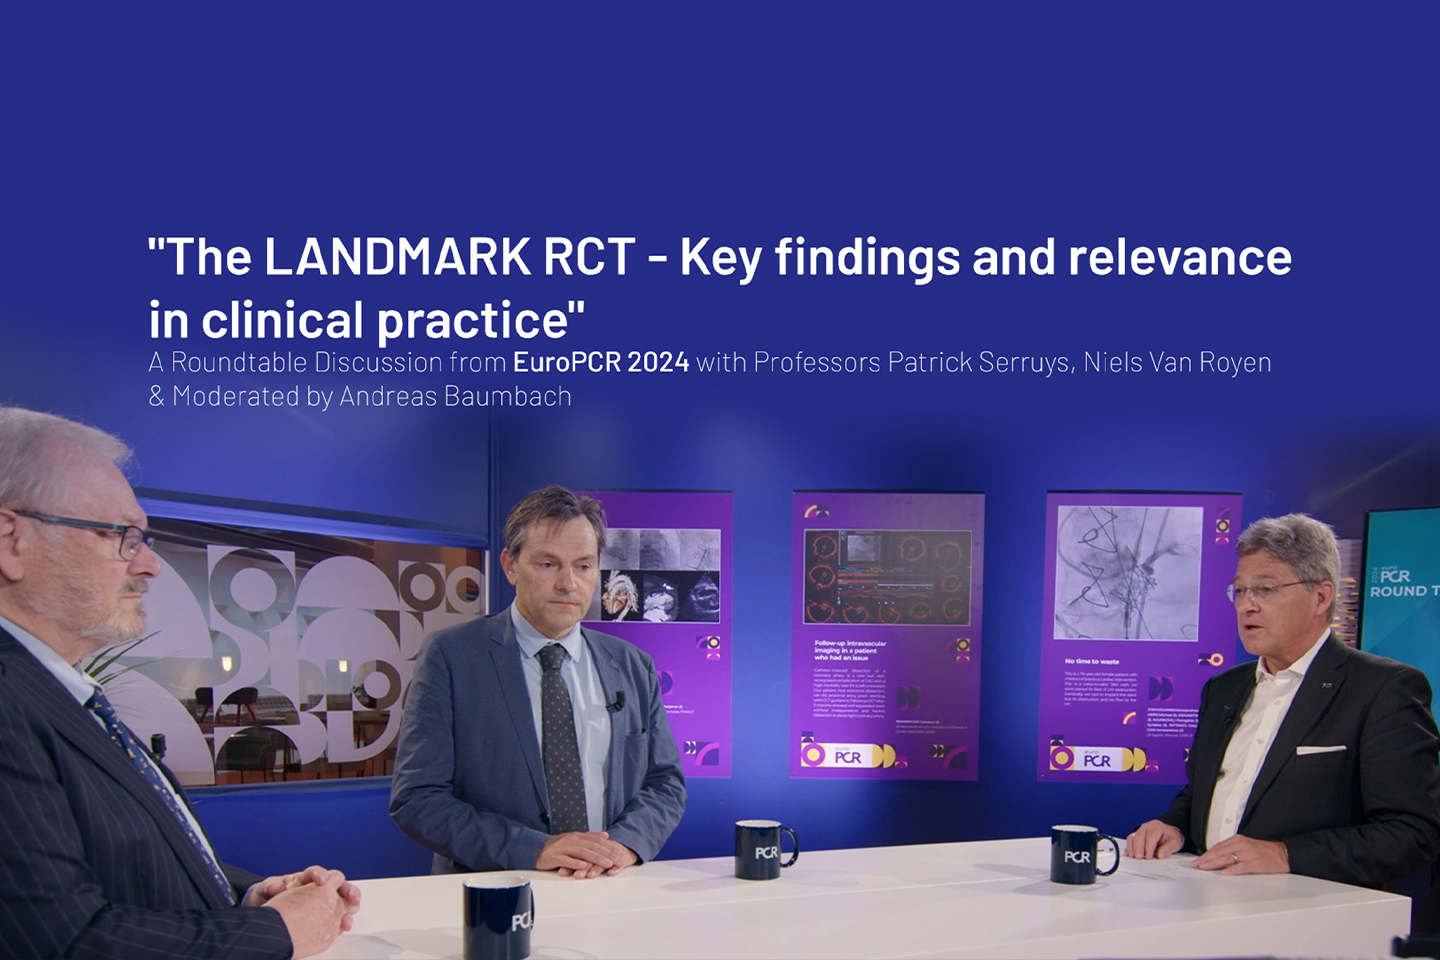 A PCR Roundtable Discussion on Key Findings from the Landmark Study and it’s Relevance in Clinical Practice